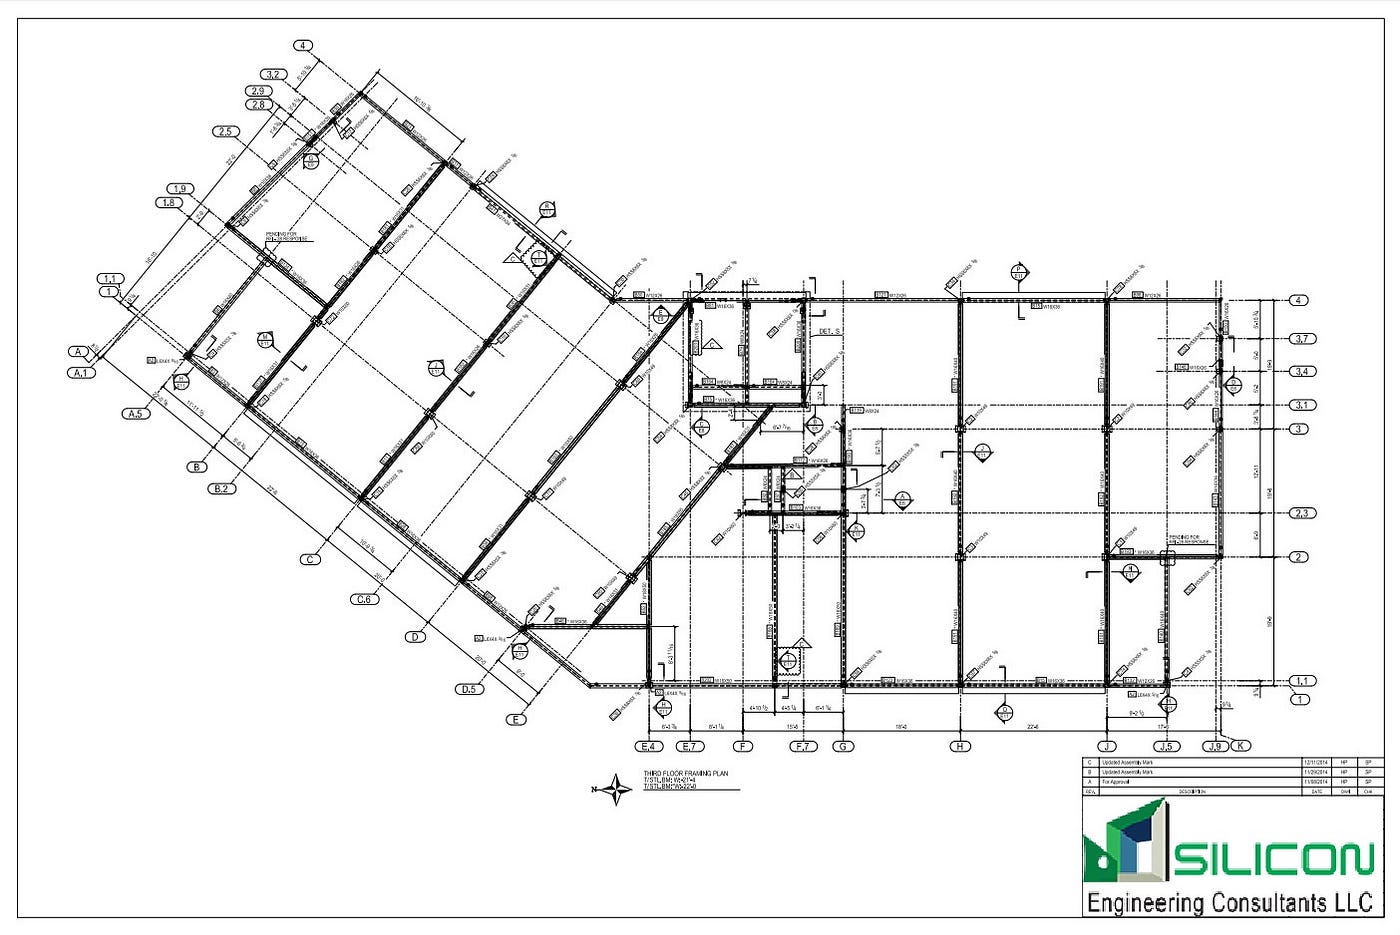 Structural Steel Detailing & Fabrication Drawings - Syracuse NY & Beyond